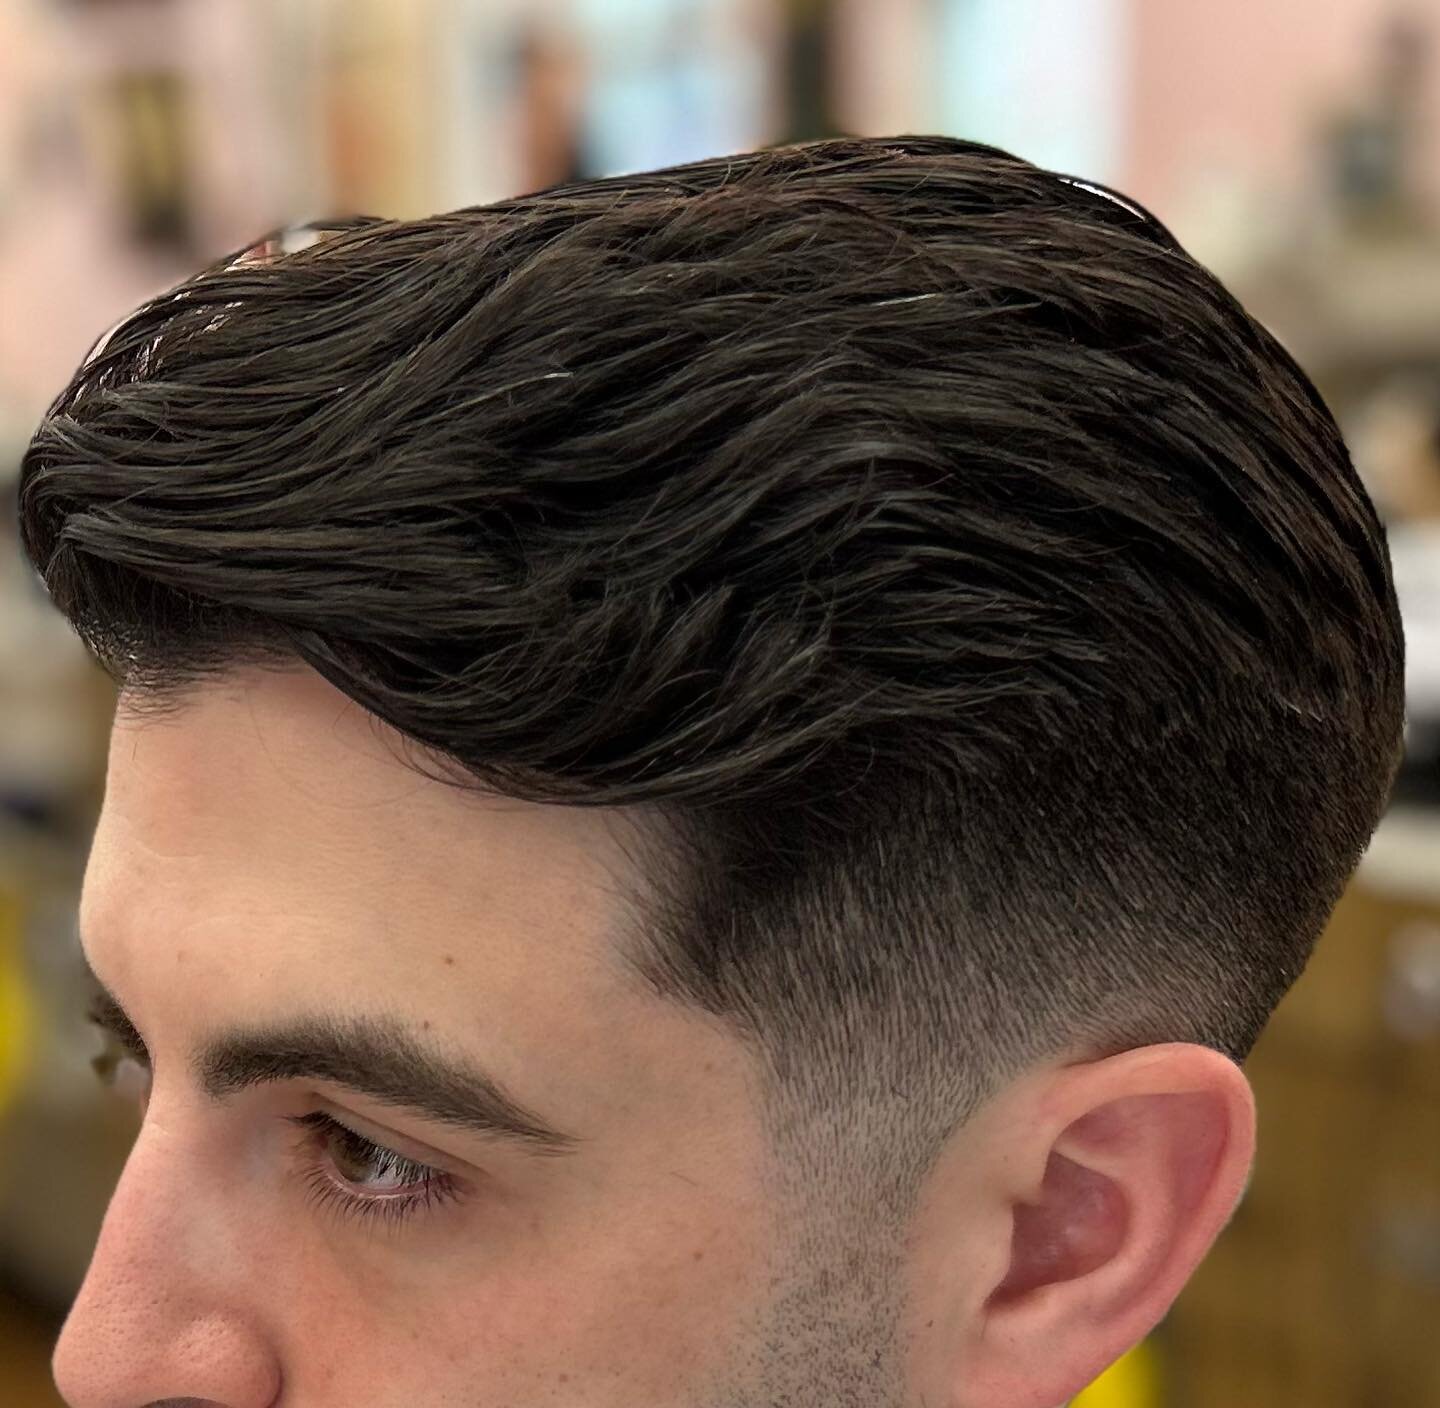 &lsquo;Perfection&rsquo; isn&rsquo;t just about the finished product, but the moment you enter, the moment you sit, the moment you pay, and the moment you leave - door to door. And sometimes you get an okay haircut. 
.
.
.
#traditionalbarber #oldscho